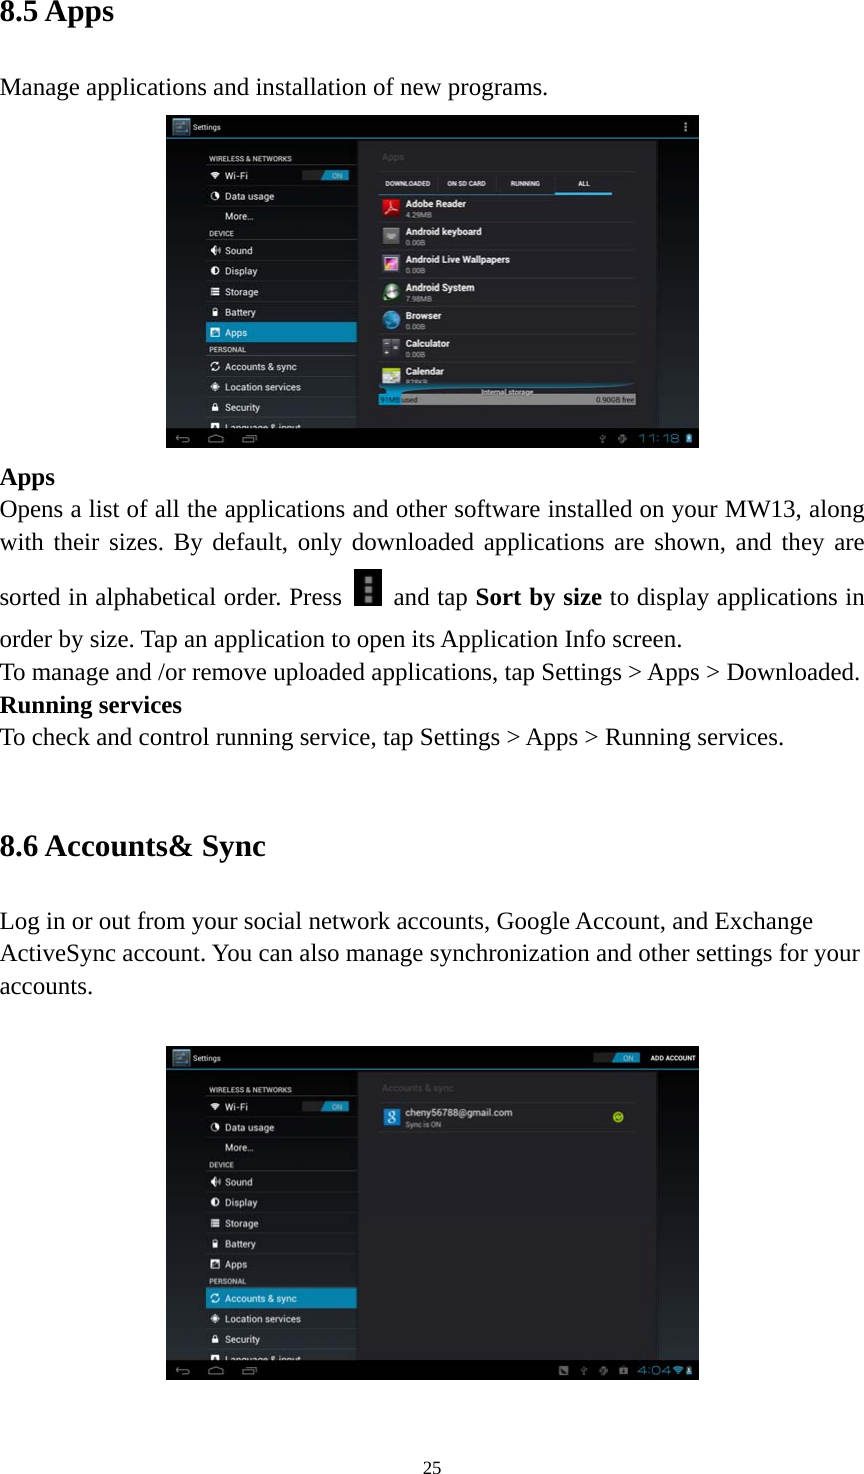 25 8.5 Apps   Manage applications and installation of new programs.  Apps  Opens a list of all the applications and other software installed on your MW13, along with their sizes. By default, only downloaded applications are shown, and they are sorted in alphabetical order. Press   and tap Sort by size to display applications in order by size. Tap an application to open its Application Info screen. To manage and /or remove uploaded applications, tap Settings &gt; Apps &gt; Downloaded.     Running services To check and control running service, tap Settings &gt; Apps &gt; Running services.    8.6 Accounts&amp; Sync Log in or out from your social network accounts, Google Account, and Exchange ActiveSync account. You can also manage synchronization and other settings for your accounts.    